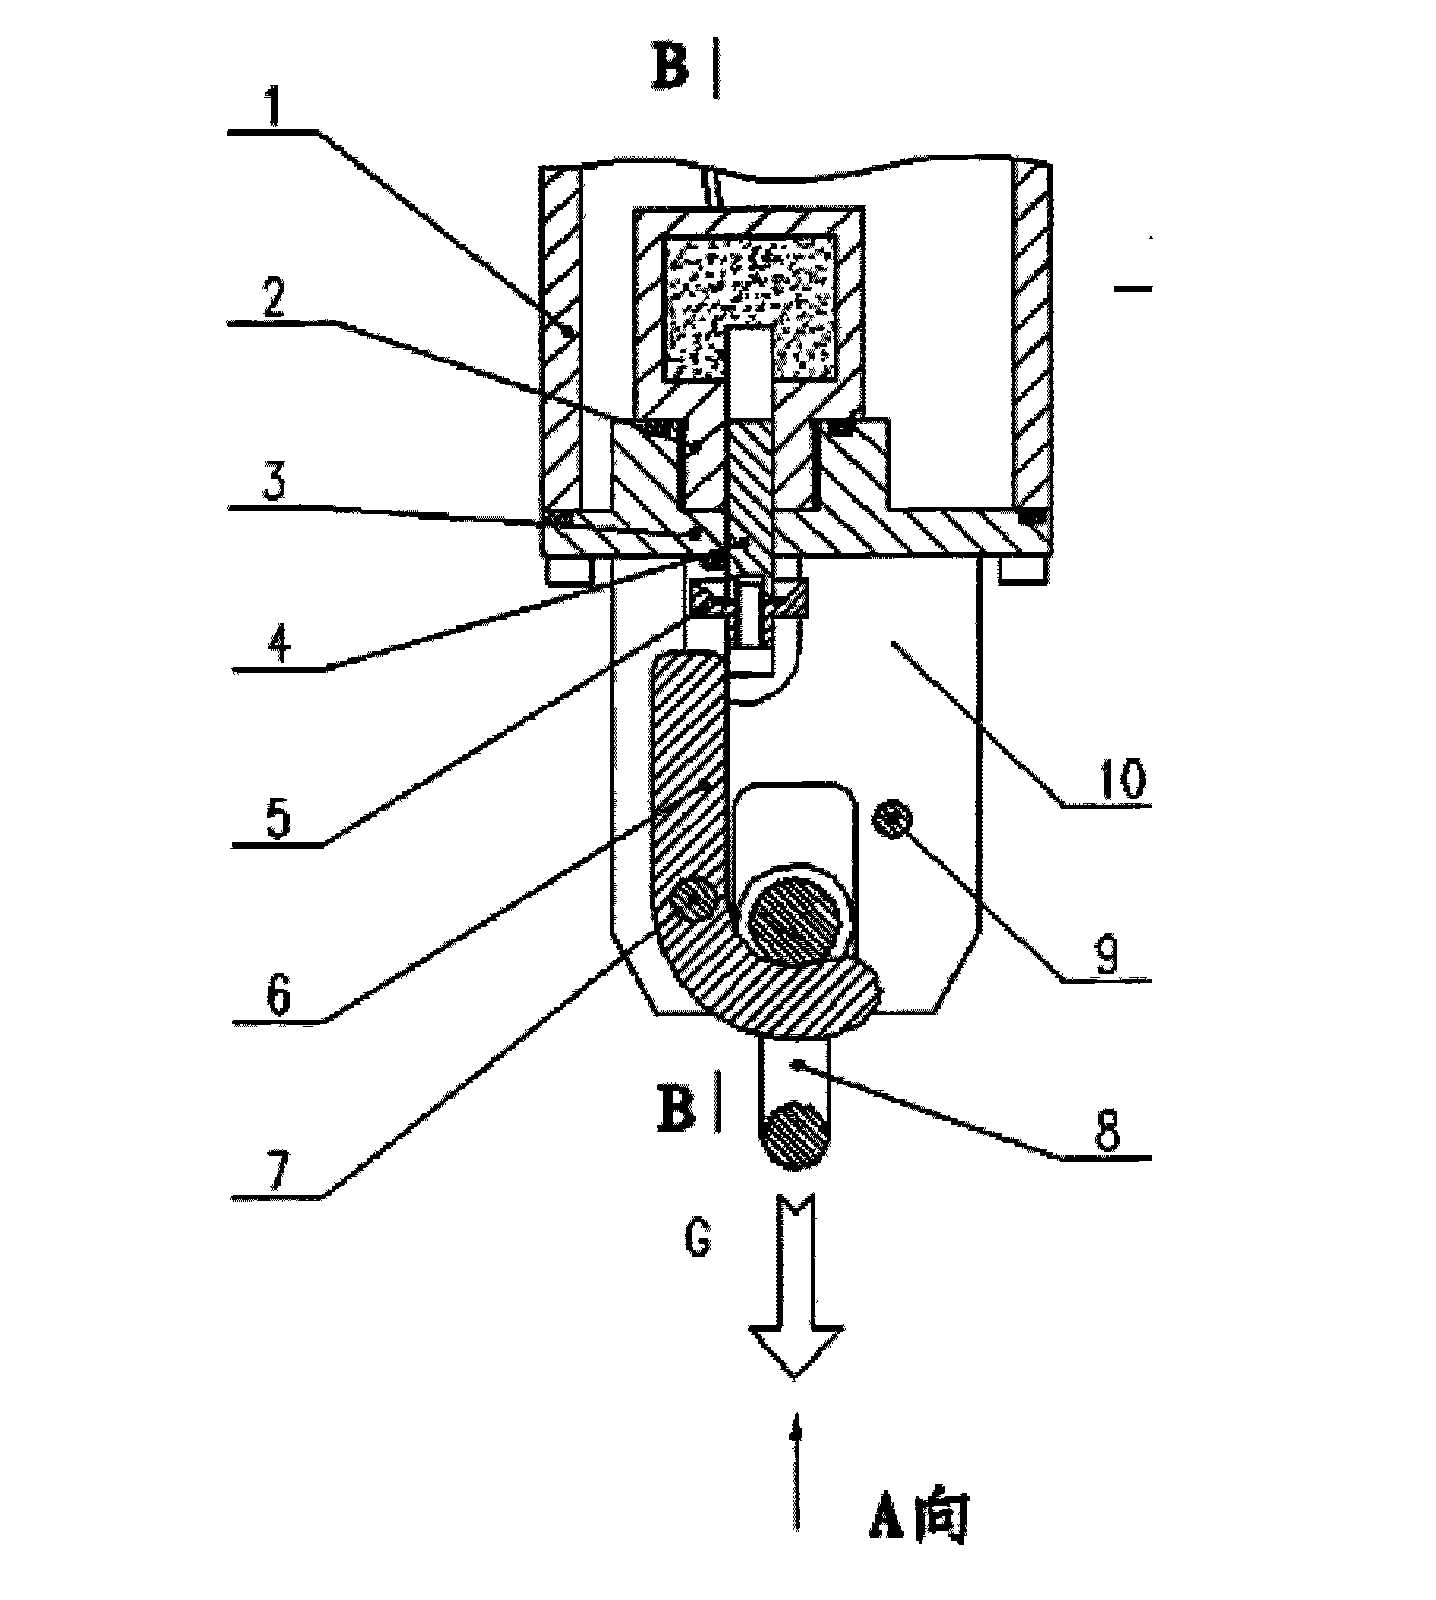 Acoustic releaser actuating mechanism capable of cutting cable